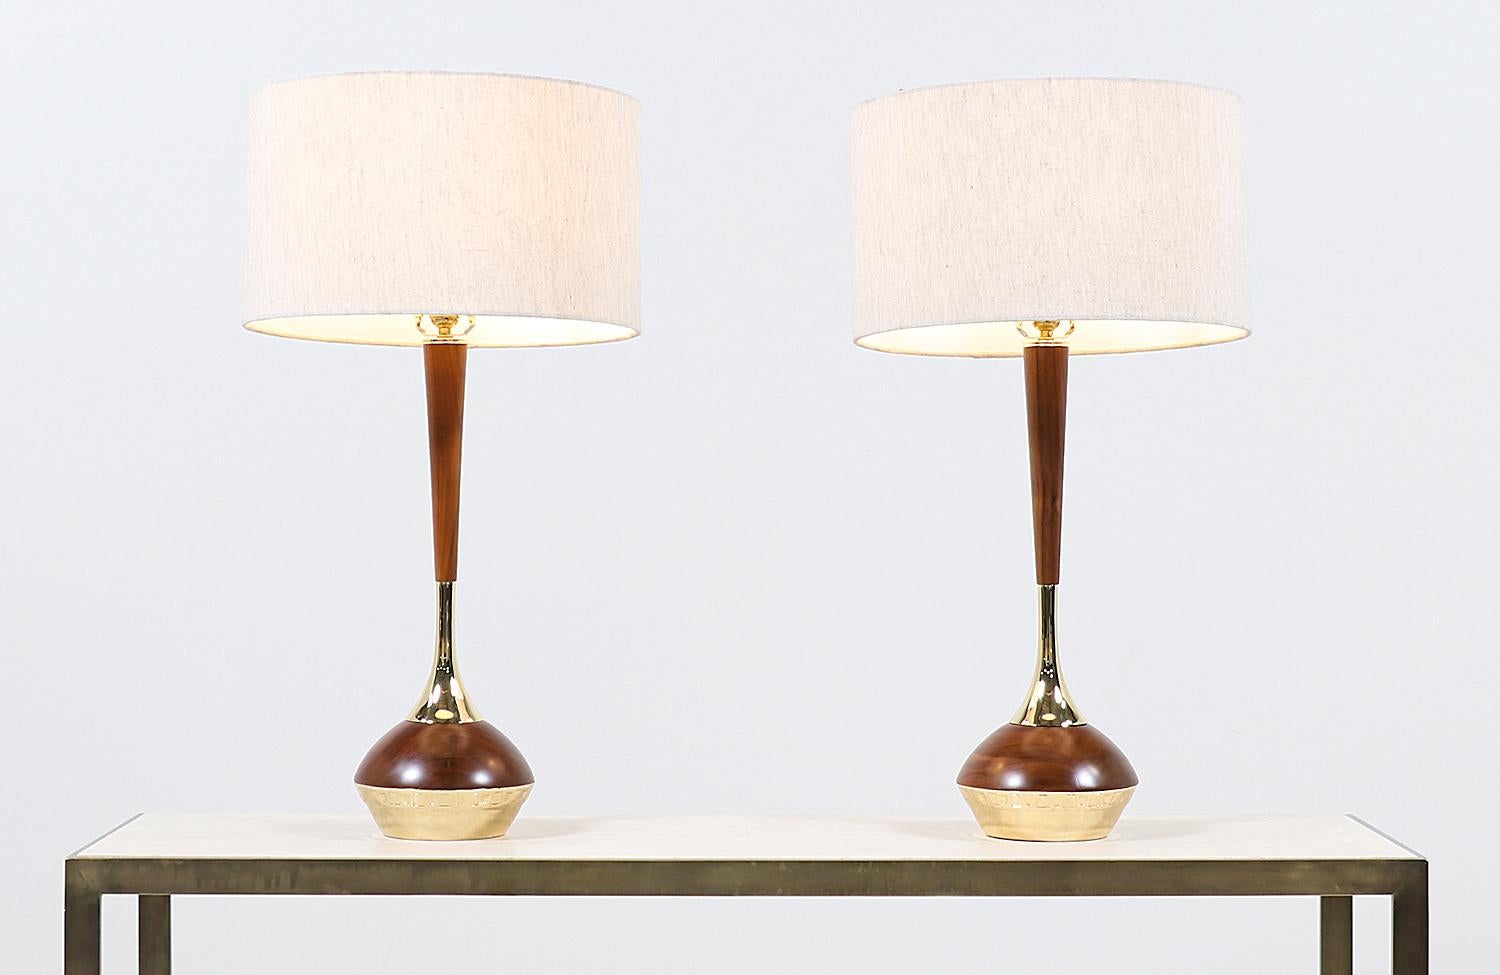 Mid-Century Modern walnut & brass accent table lamps by Laurel


Dimensions
32in H x 8in W x 8in D
Lamp shade: 10in H x 17in W.